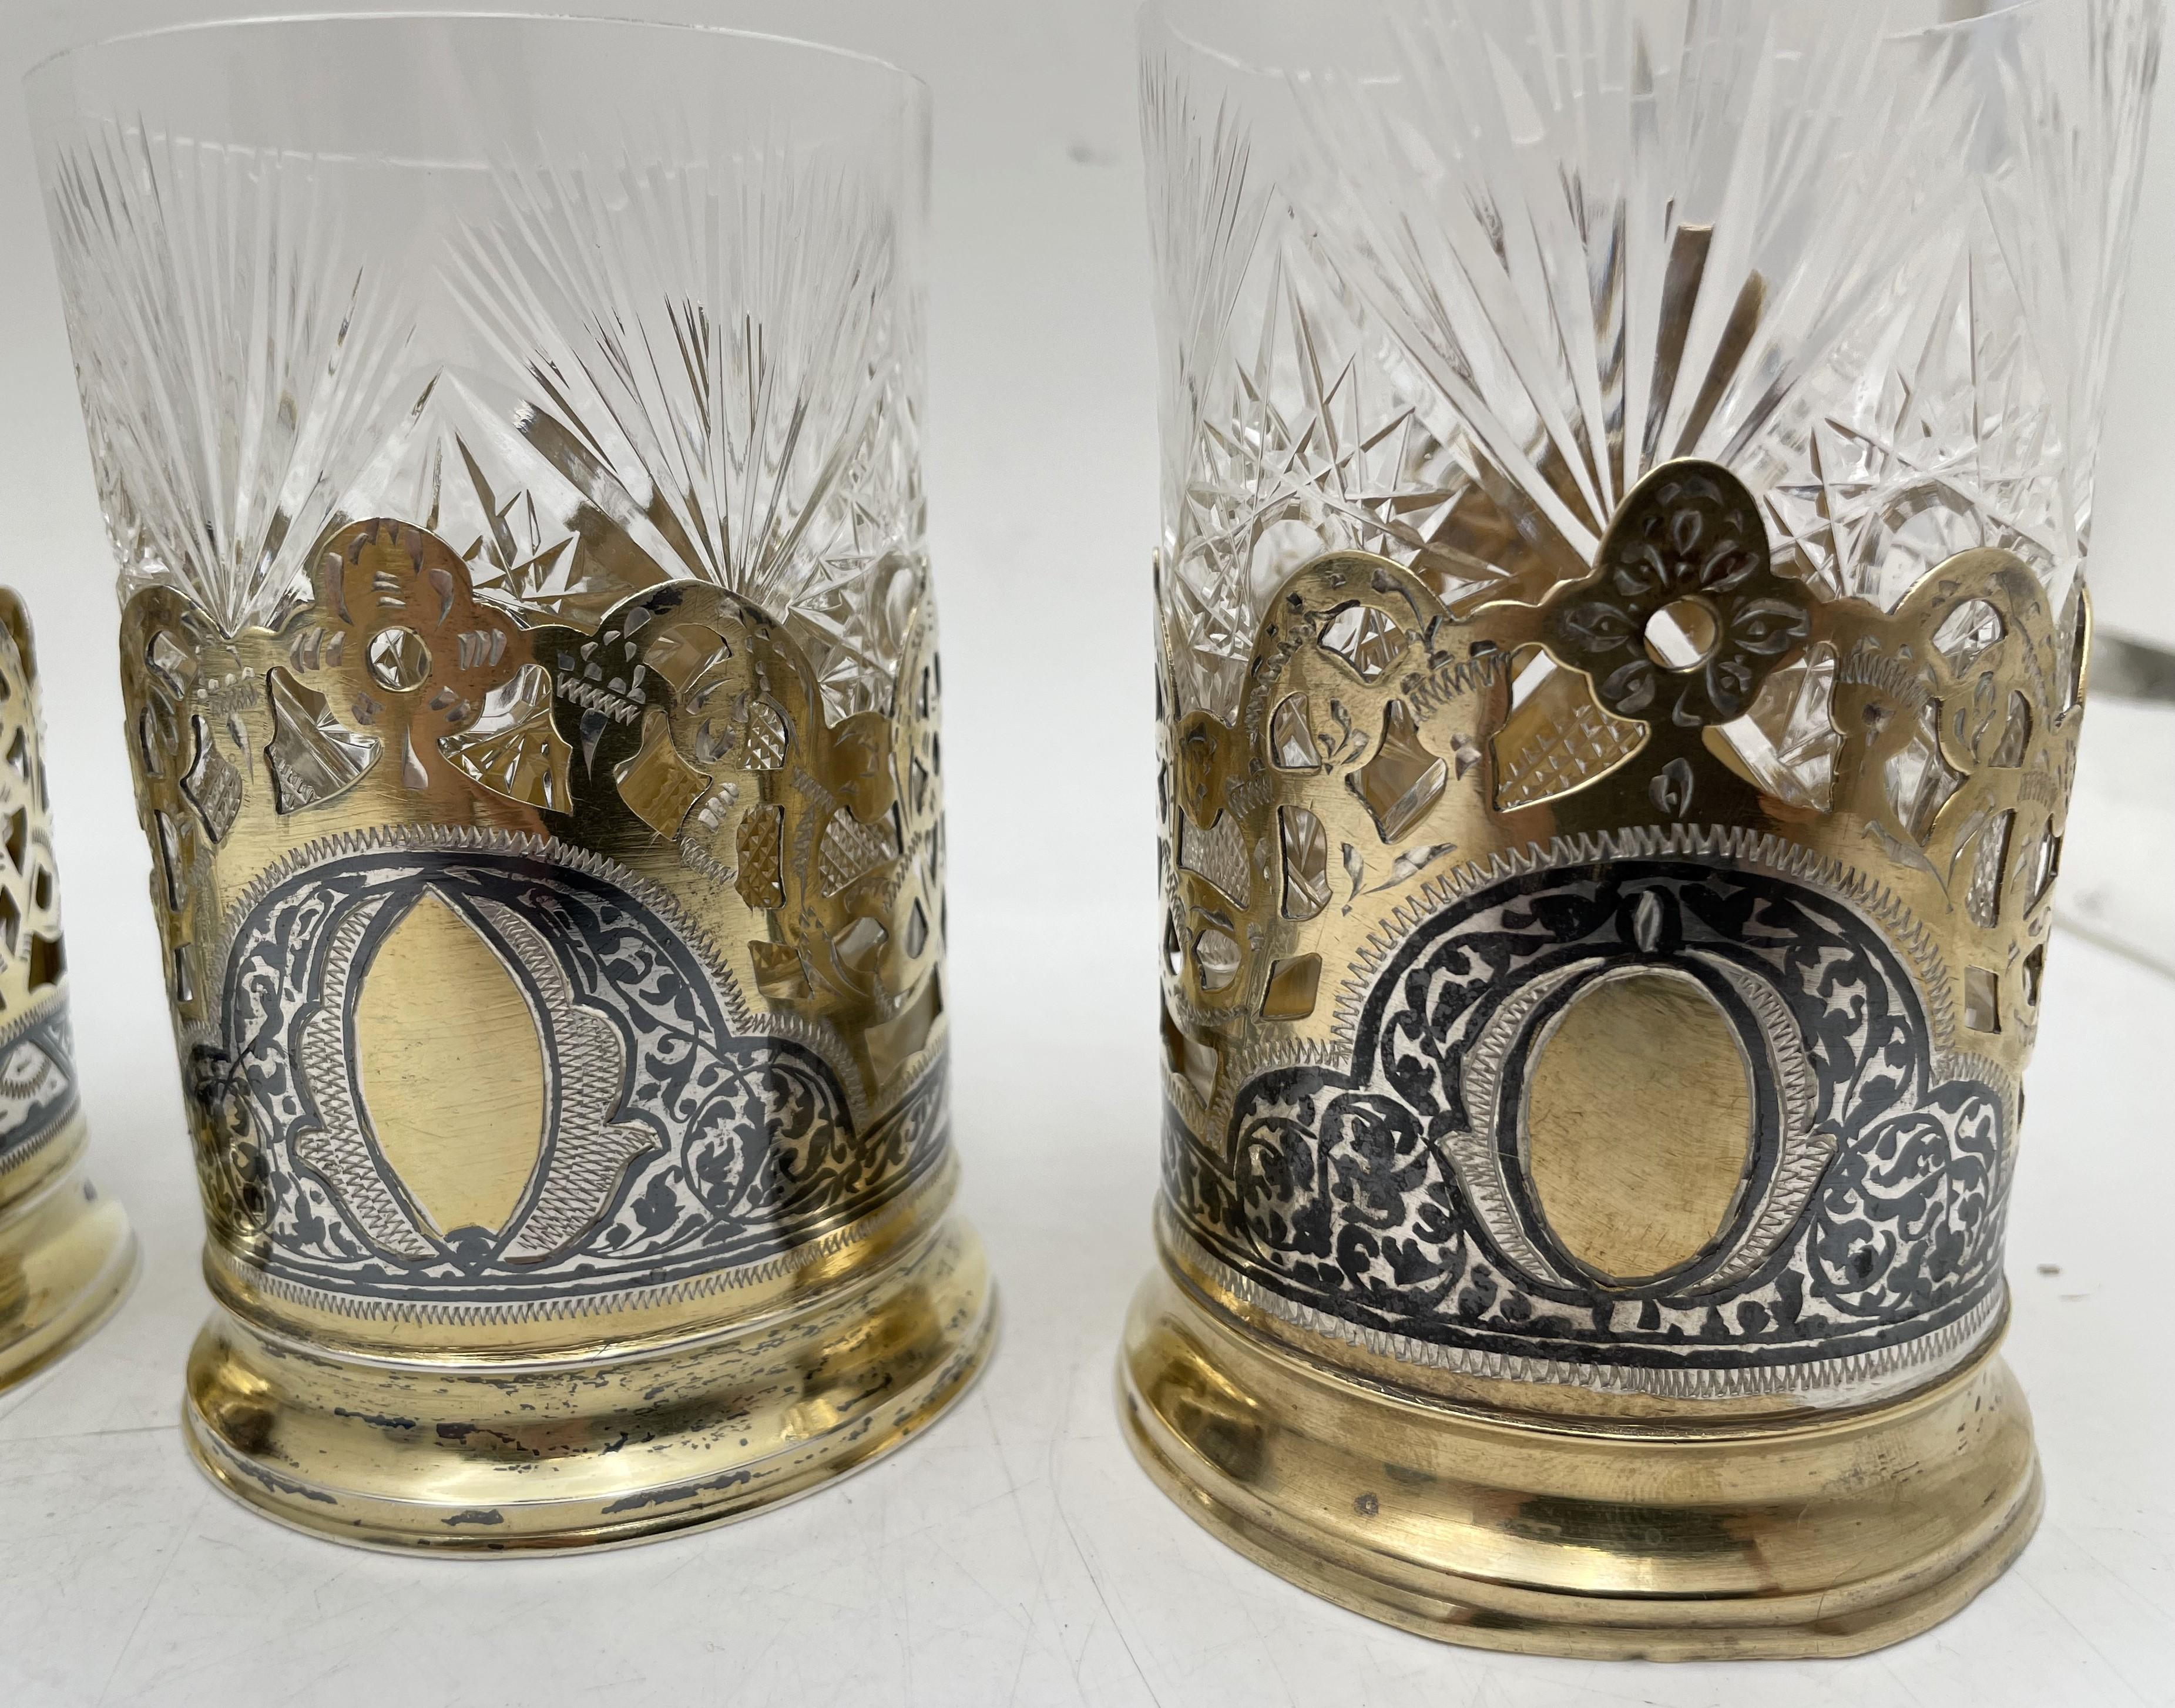 Russian gilt 0.87 silver and enamel/ niello set of 6 cups with a beautiful, intricate, geometric and floral design from the 20th century. Fitted glass liners enhance the beauty of these cups. The cups measure 3 7/8'' in height (height with the liner